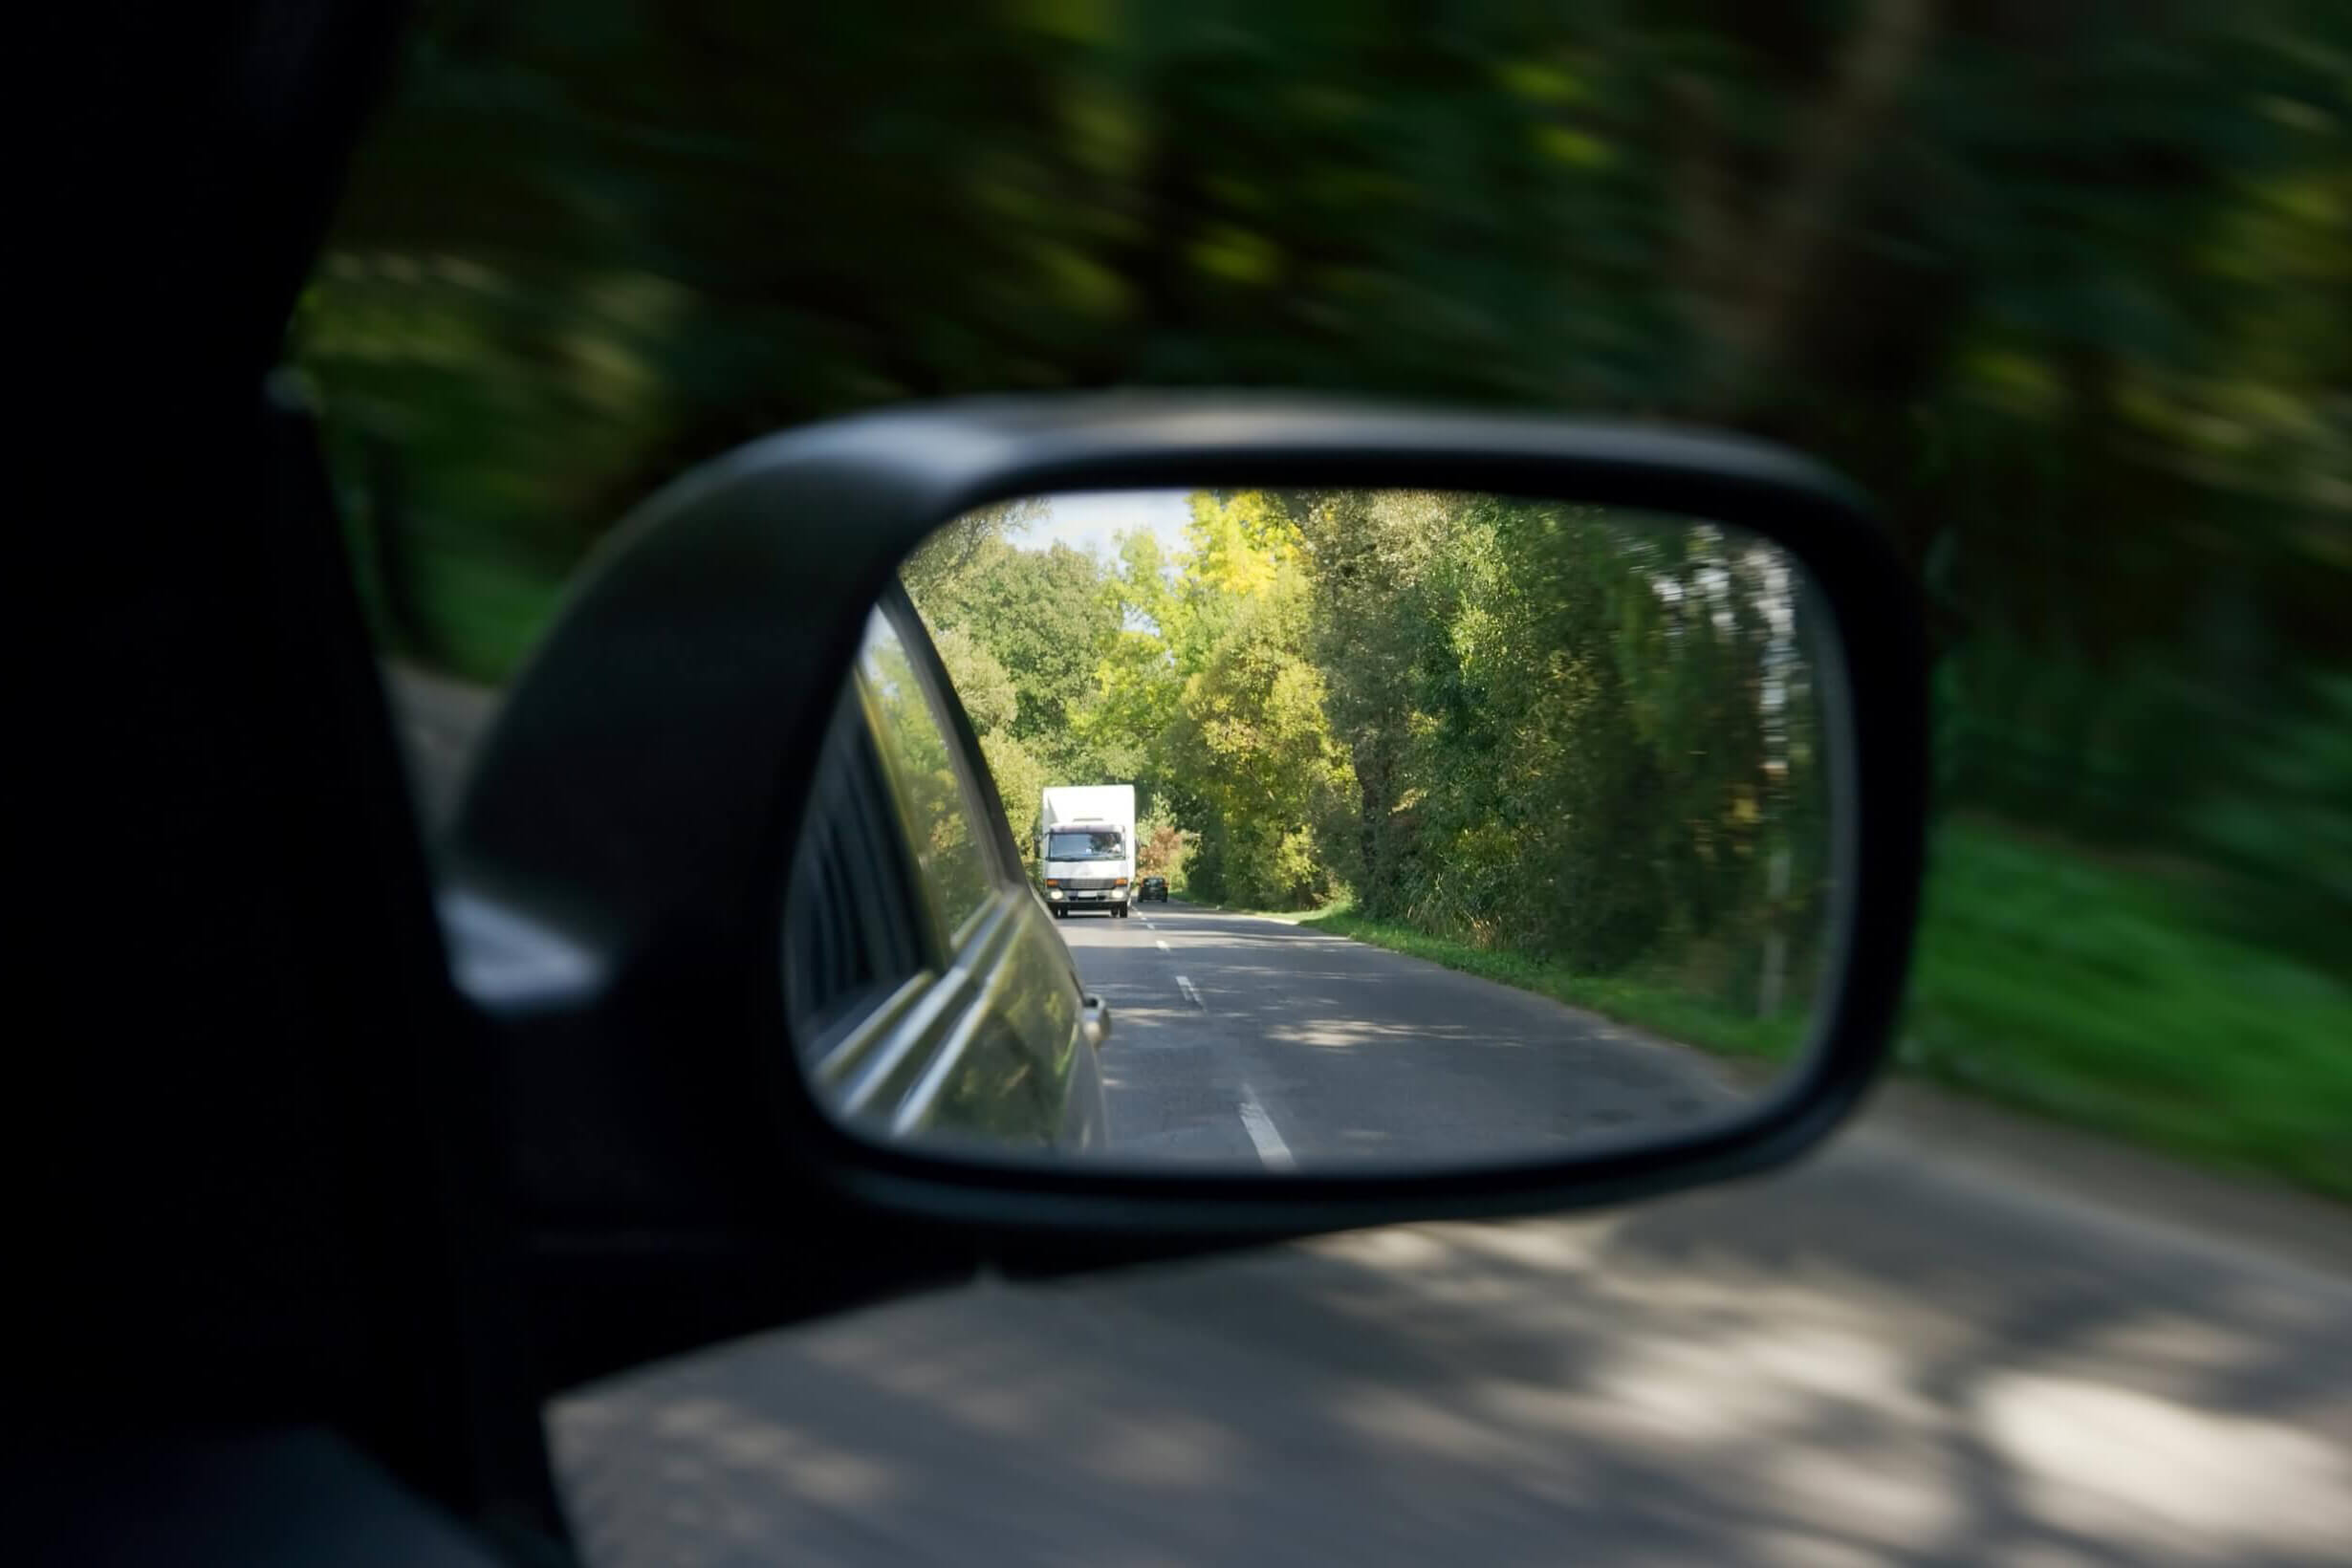 Blind Spots - How To Check Them